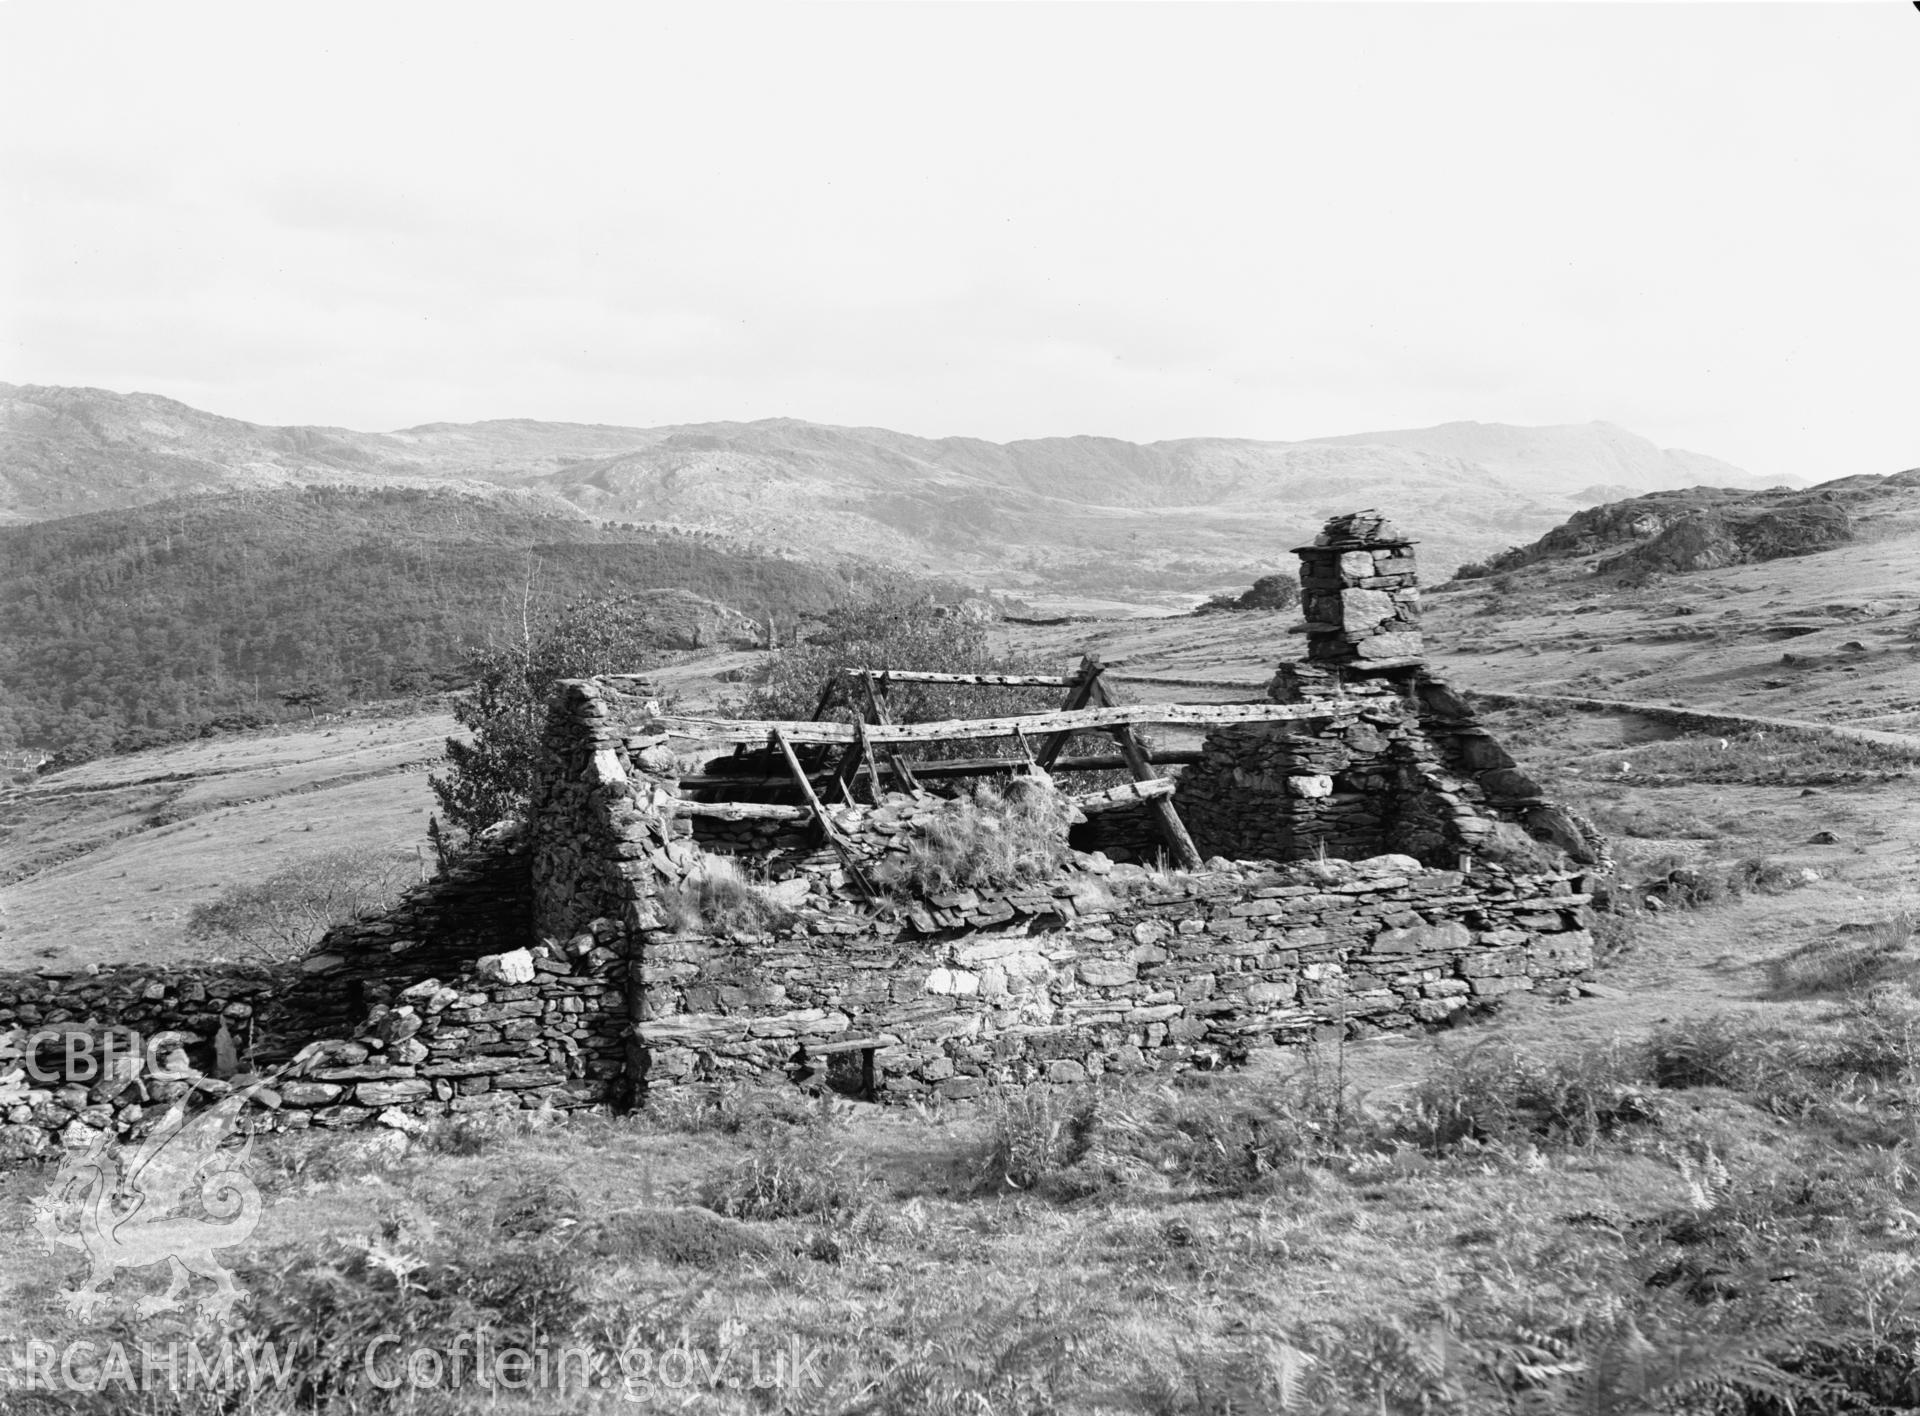 Exterior view showing the ruinous building.